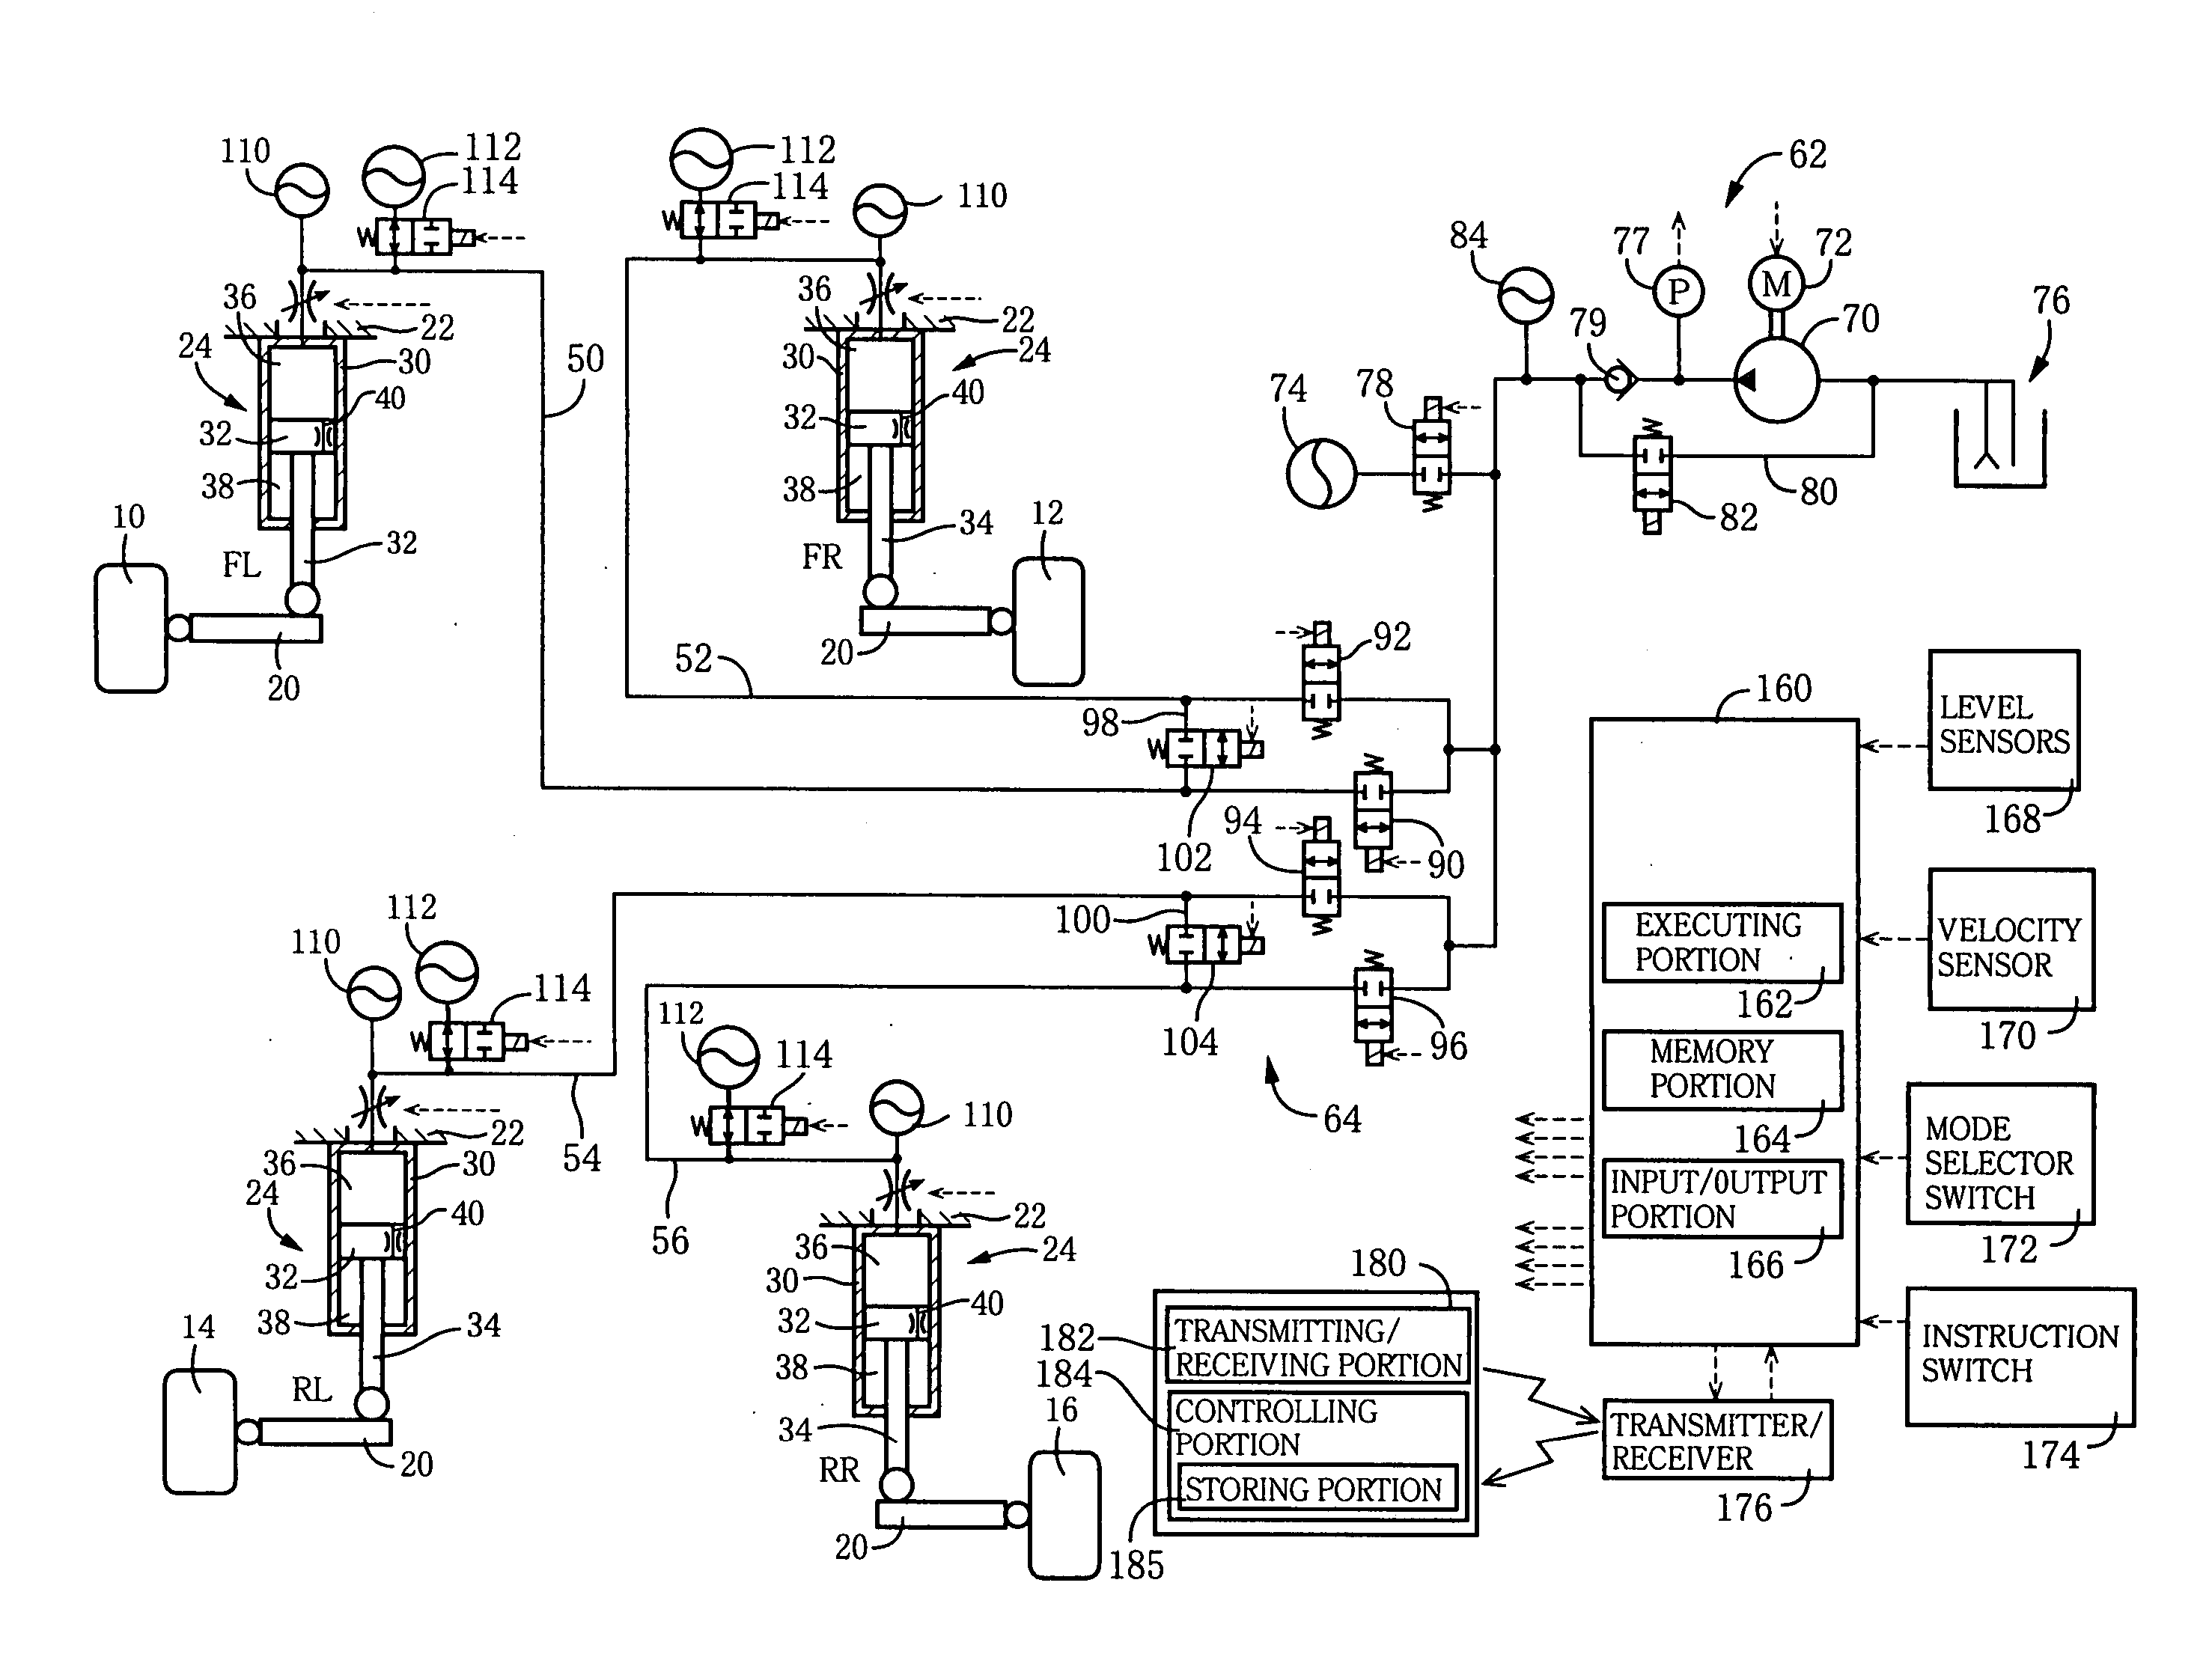 Height adjusting system for automotive vehicle